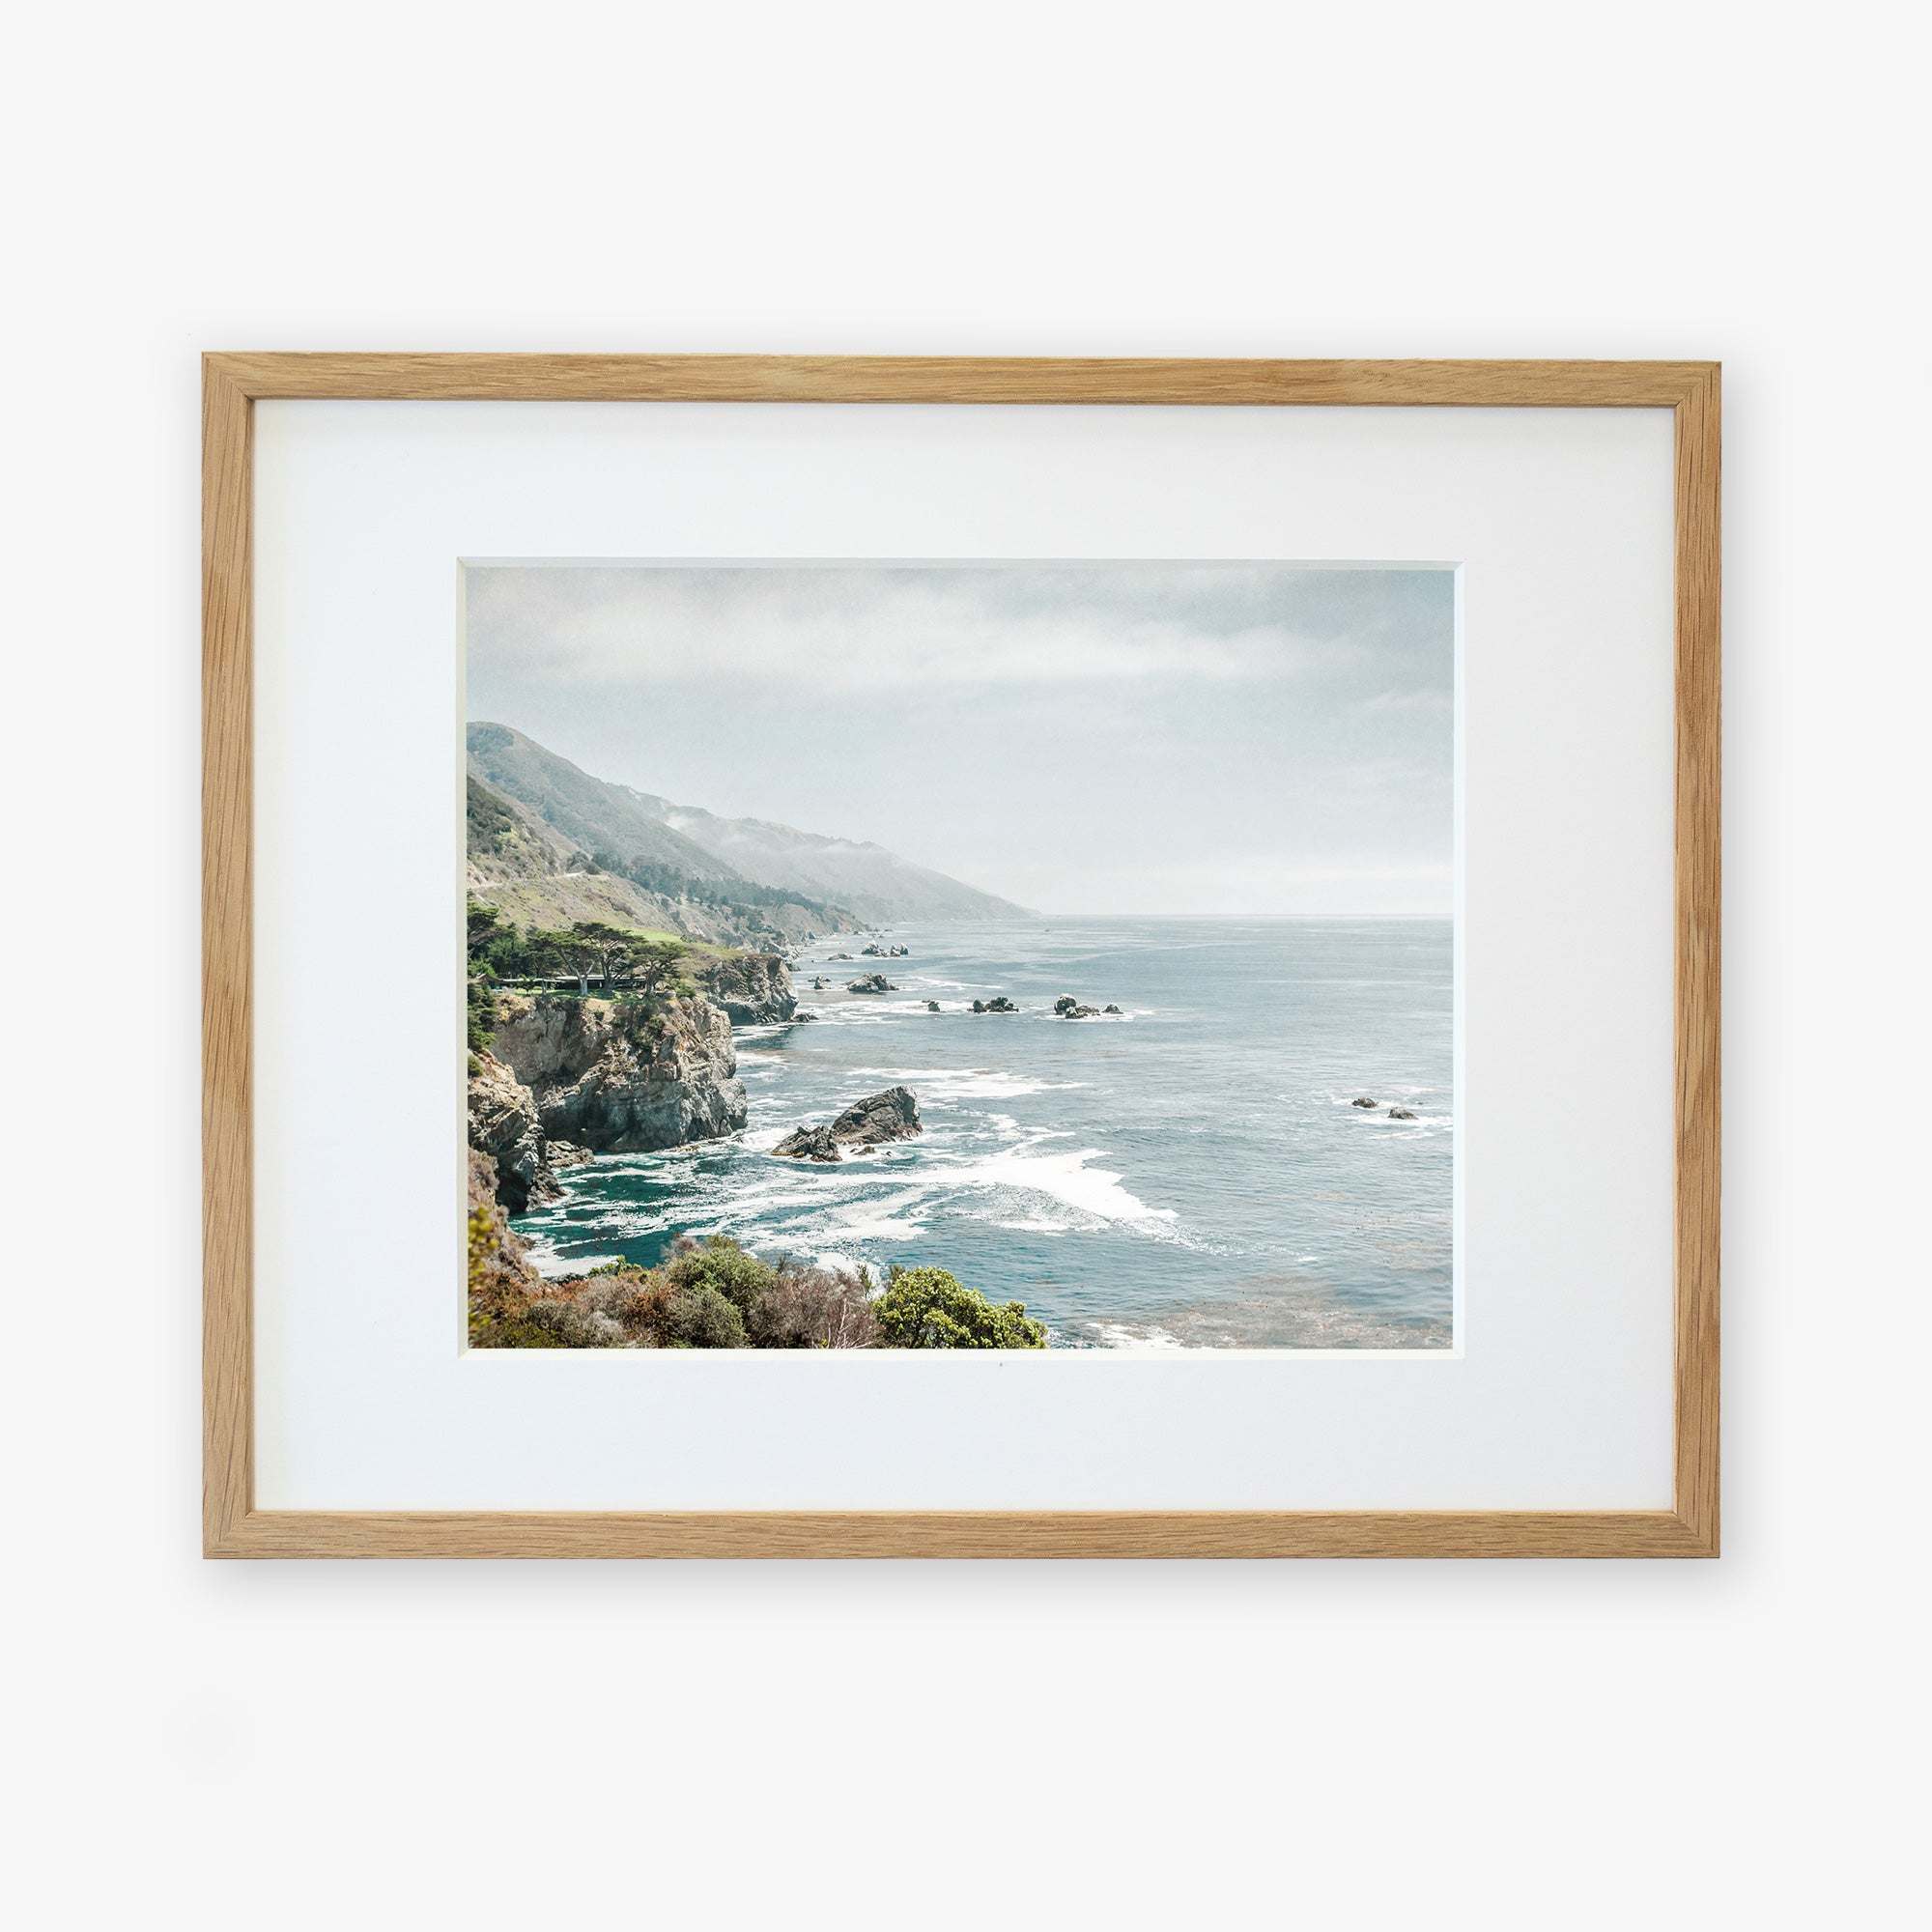 A framed wall art featuring a picturesque coastal scene from Big Sur, with cliffs, the ocean, and distant fog. The light wooden frame complements the serene coastal colors. - Offley Green's Big Sur Landscape Print 'Rocky Rocks'